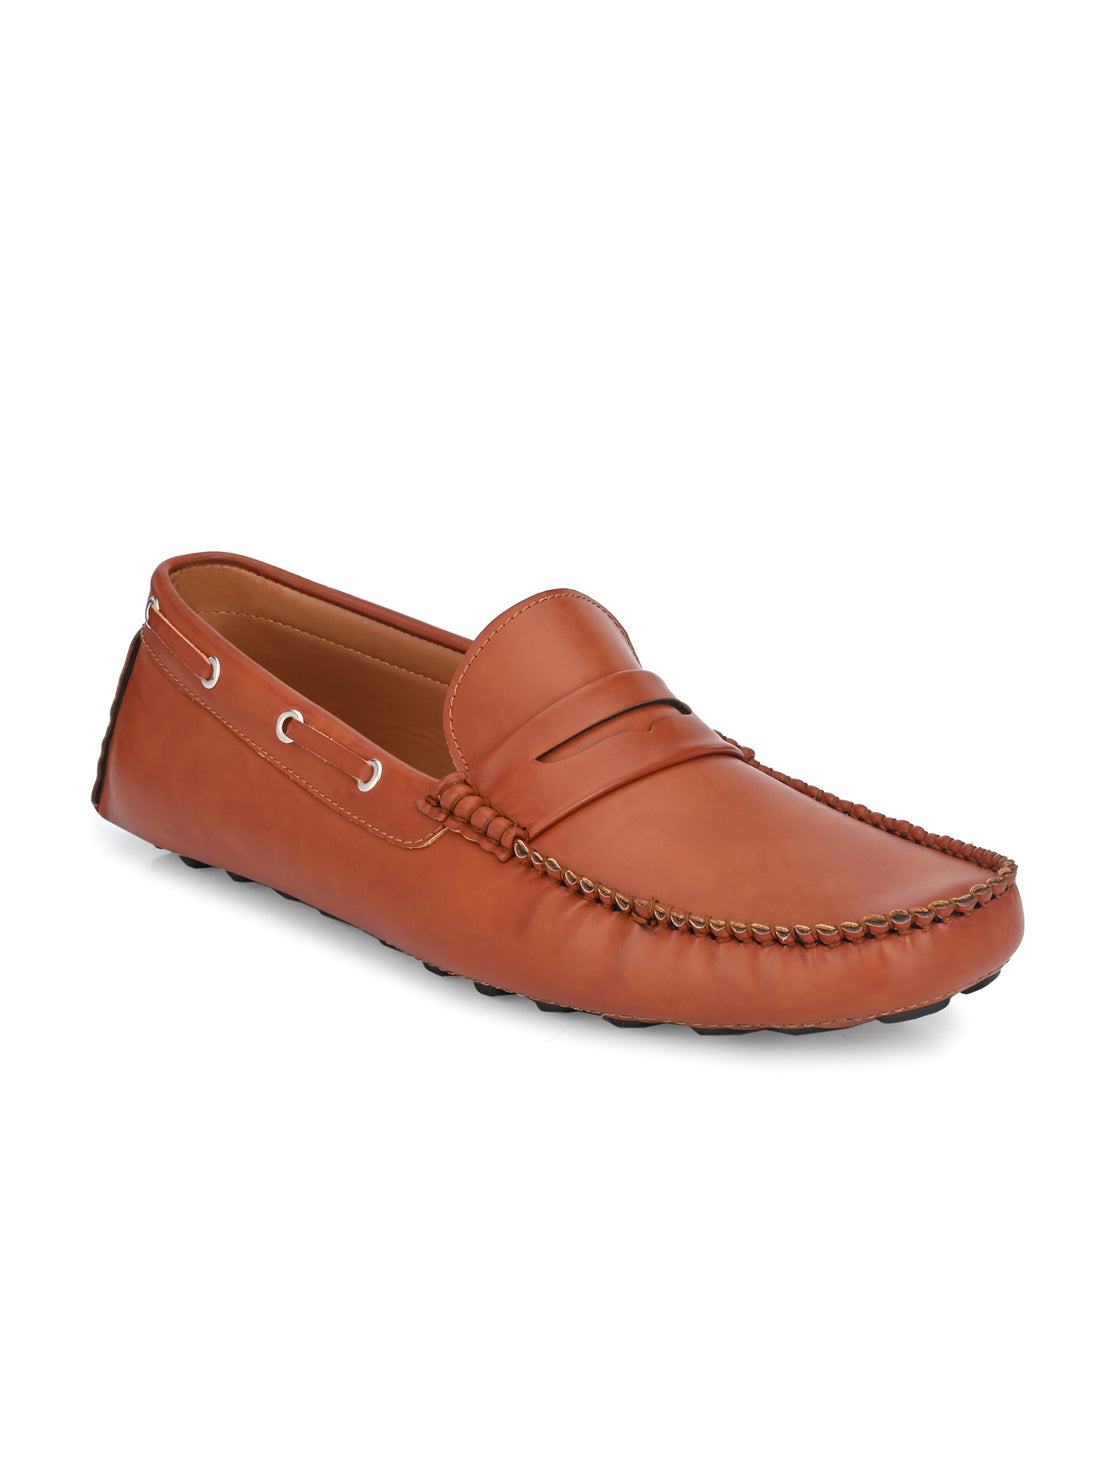 Guava Men's Tan Casual Slip On Driving Loafers (GV15JA747)